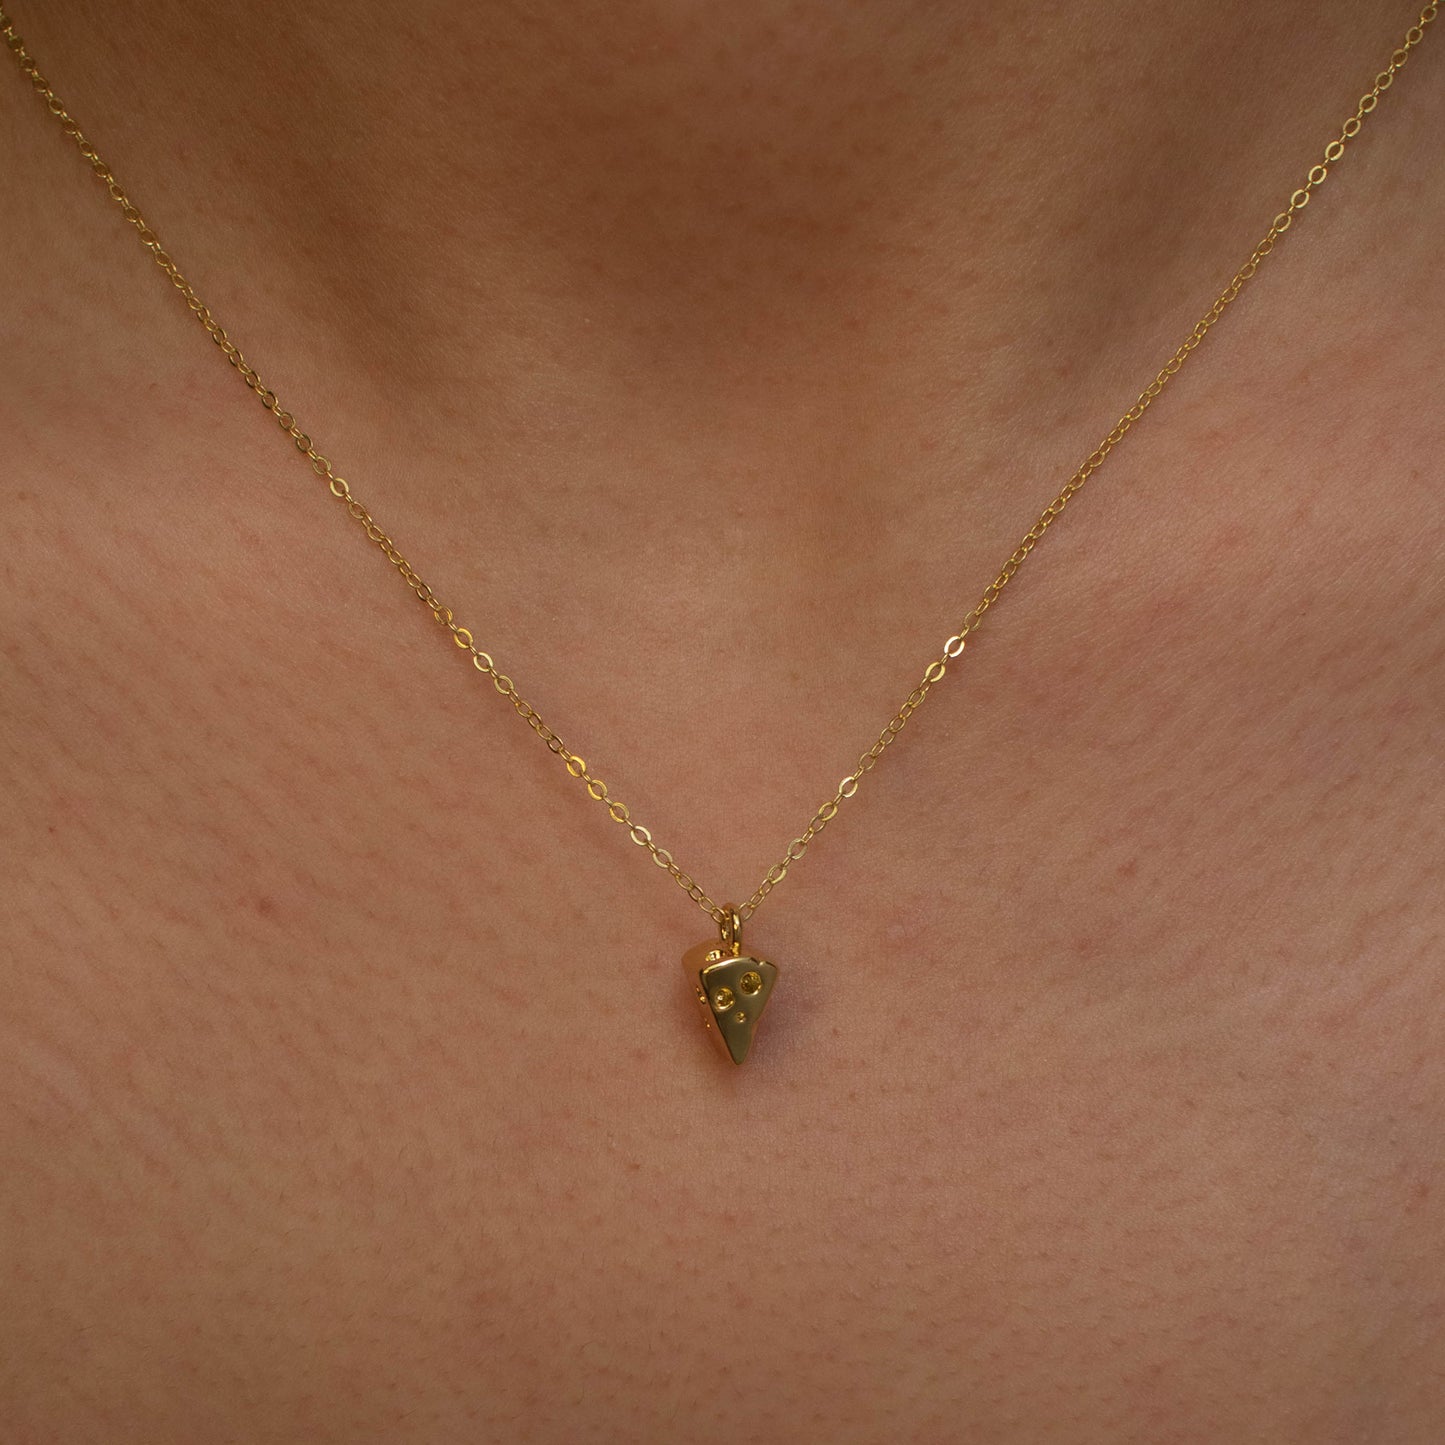 This photo features a thin chain necklace made of 14K gold-plated sterling silver, paired with a mini cheese pendant.